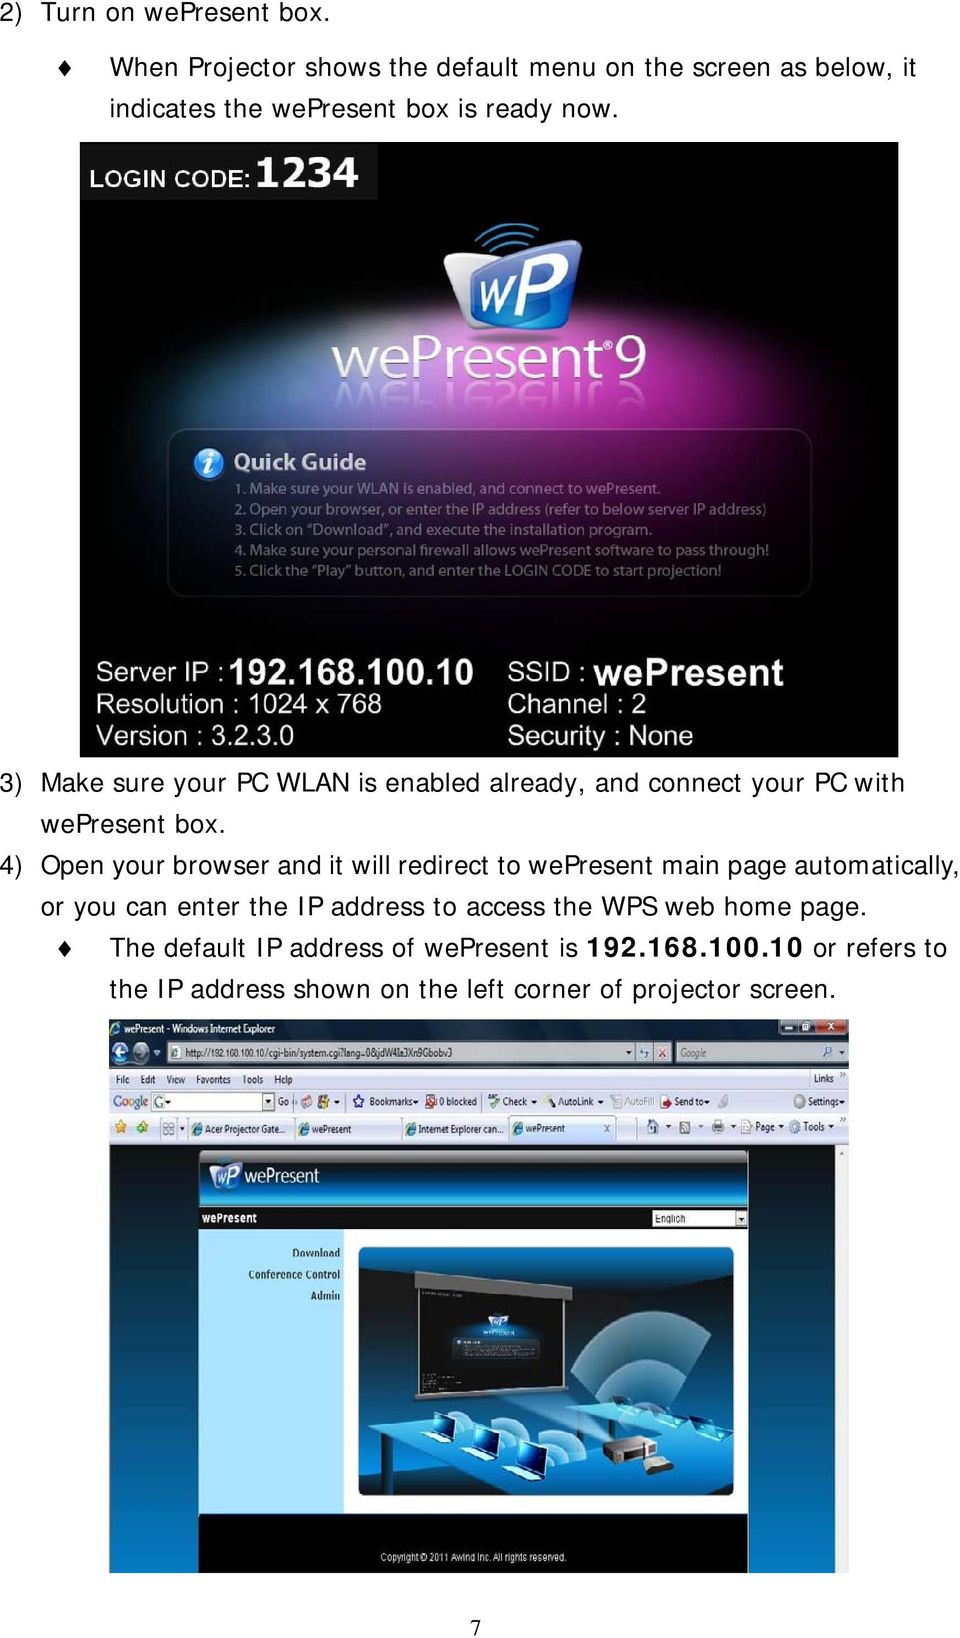 3) Make sure your PC WLAN is enabled already, and connect your PC with wepresent box.